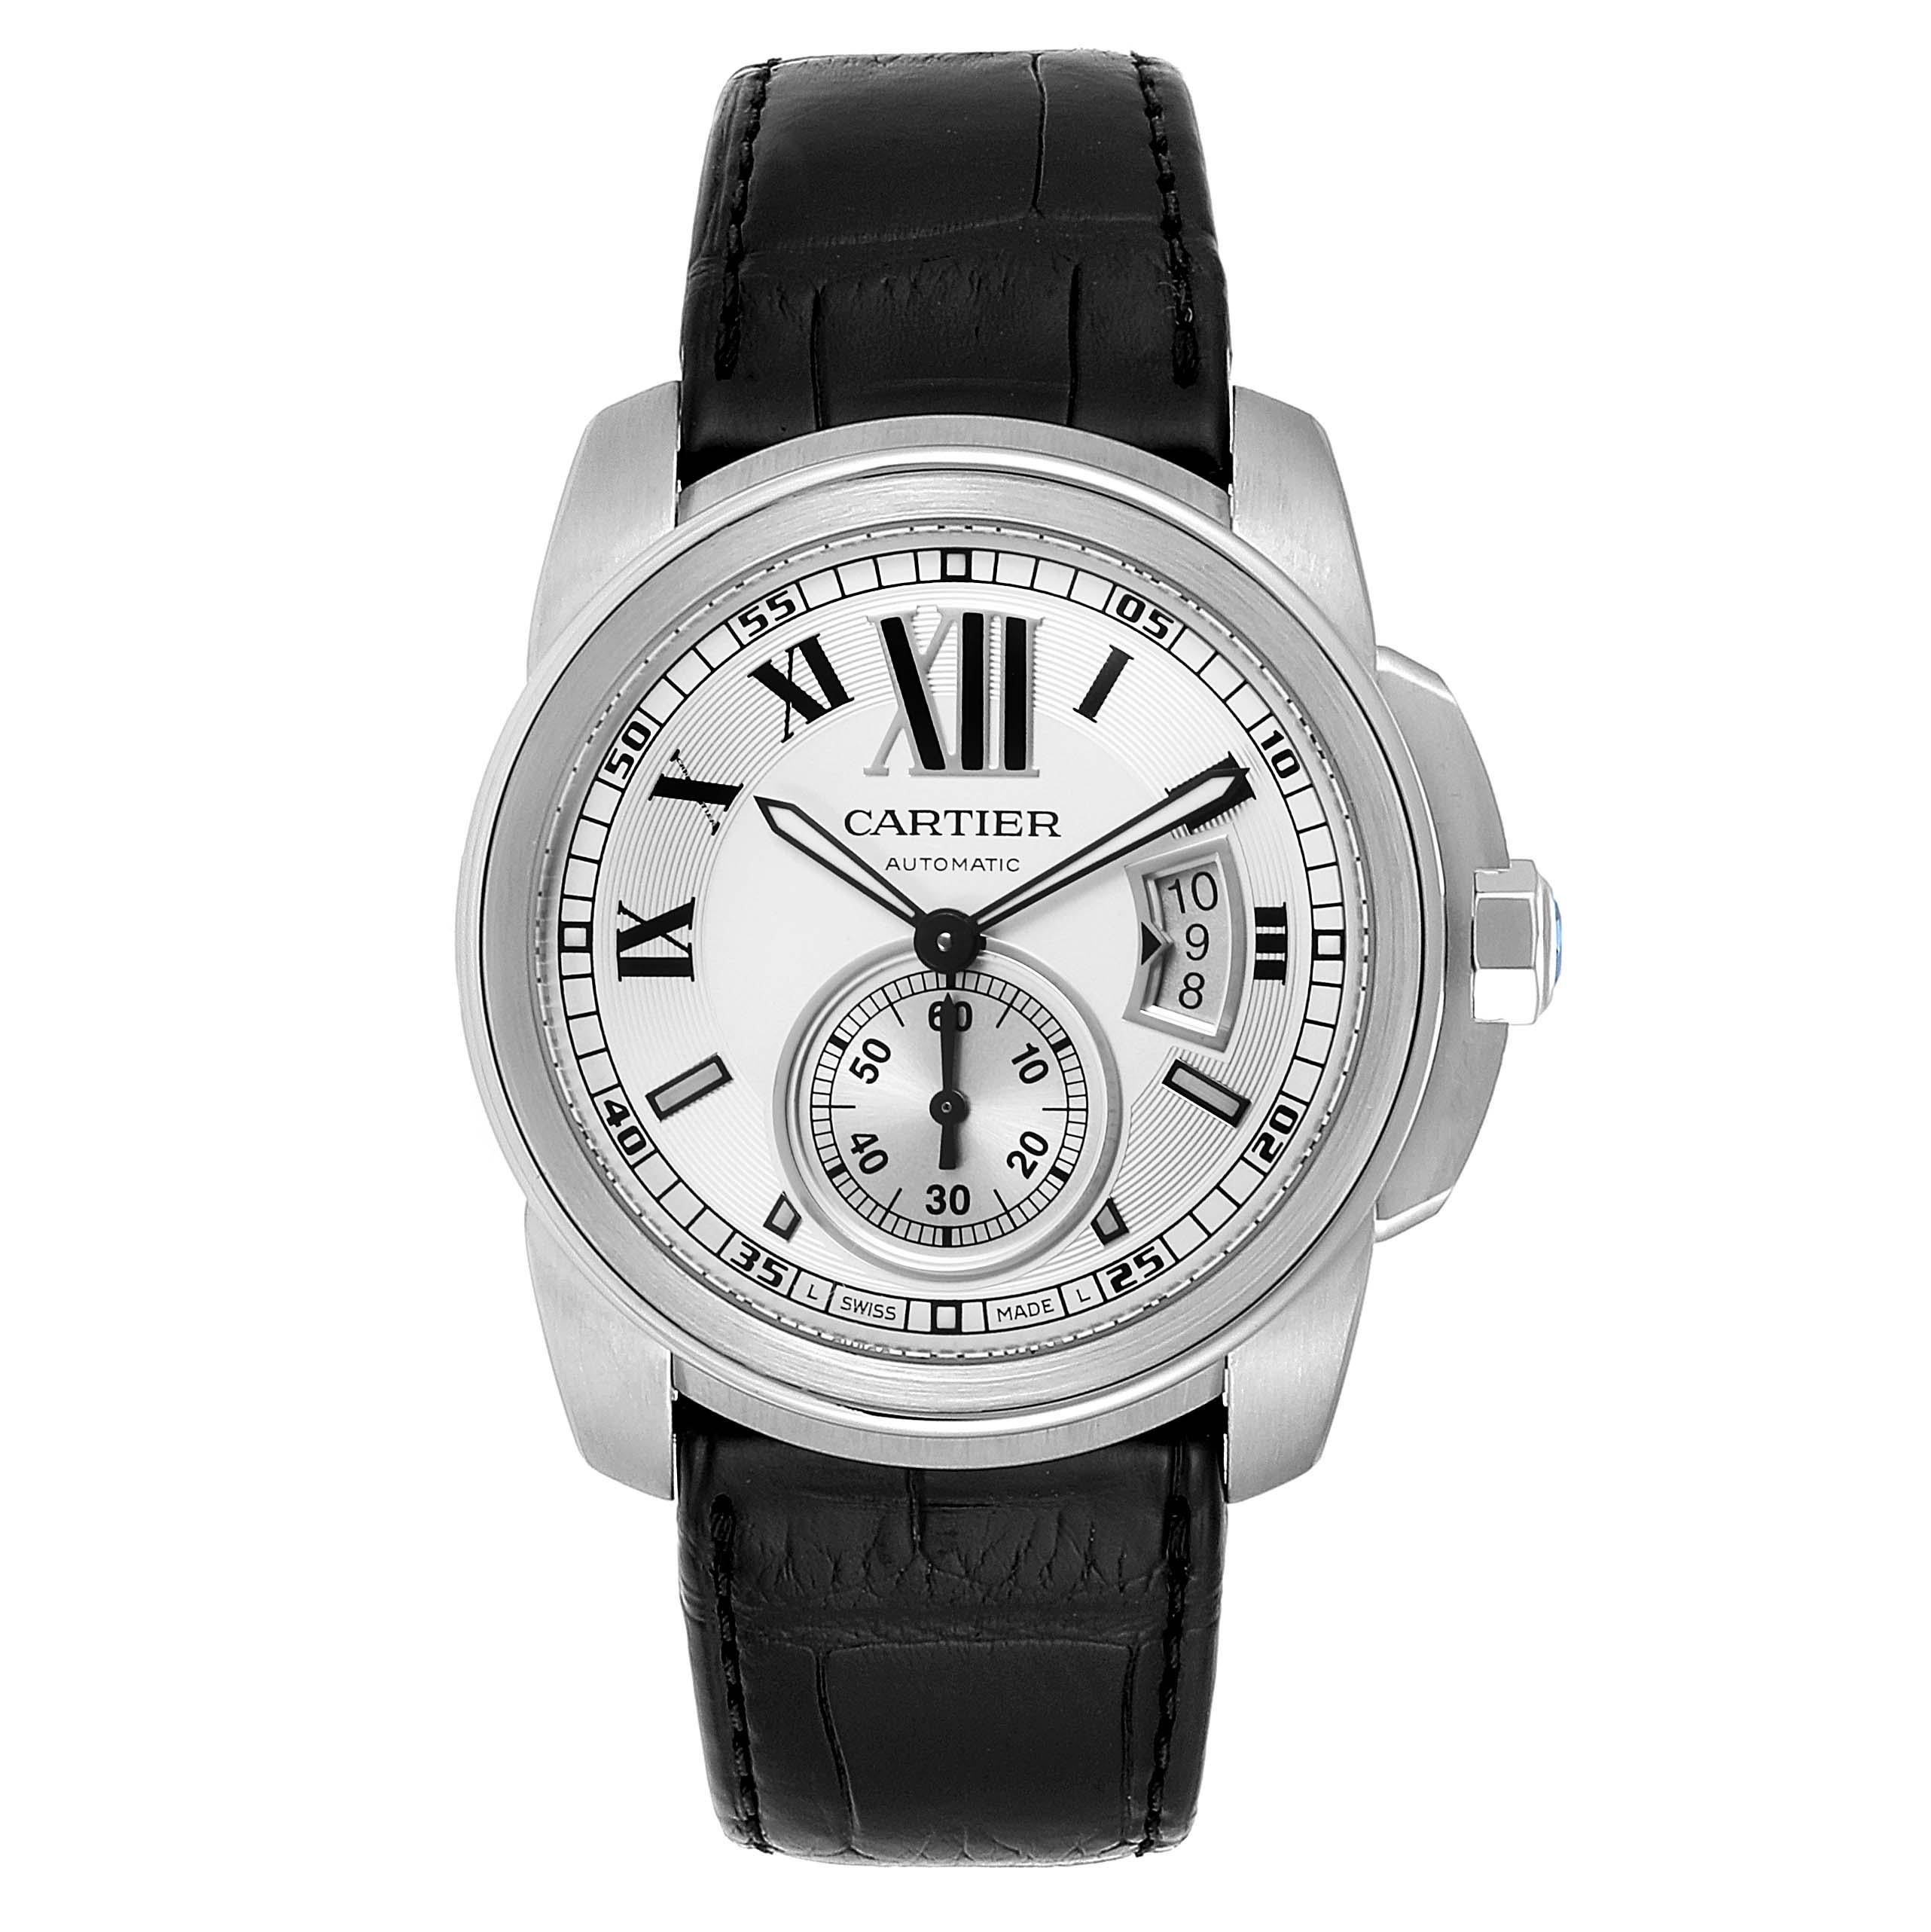 Cartier Calibre Silver Dial Steel Mens Watch W7100037 Box. Automatic self-winding movement. Stainless steel round case 42.0 mm in diameter. Crown cover with faceted blue spinel. Exhibition saphire crystal case back. Stainless steel bezel. Scratch